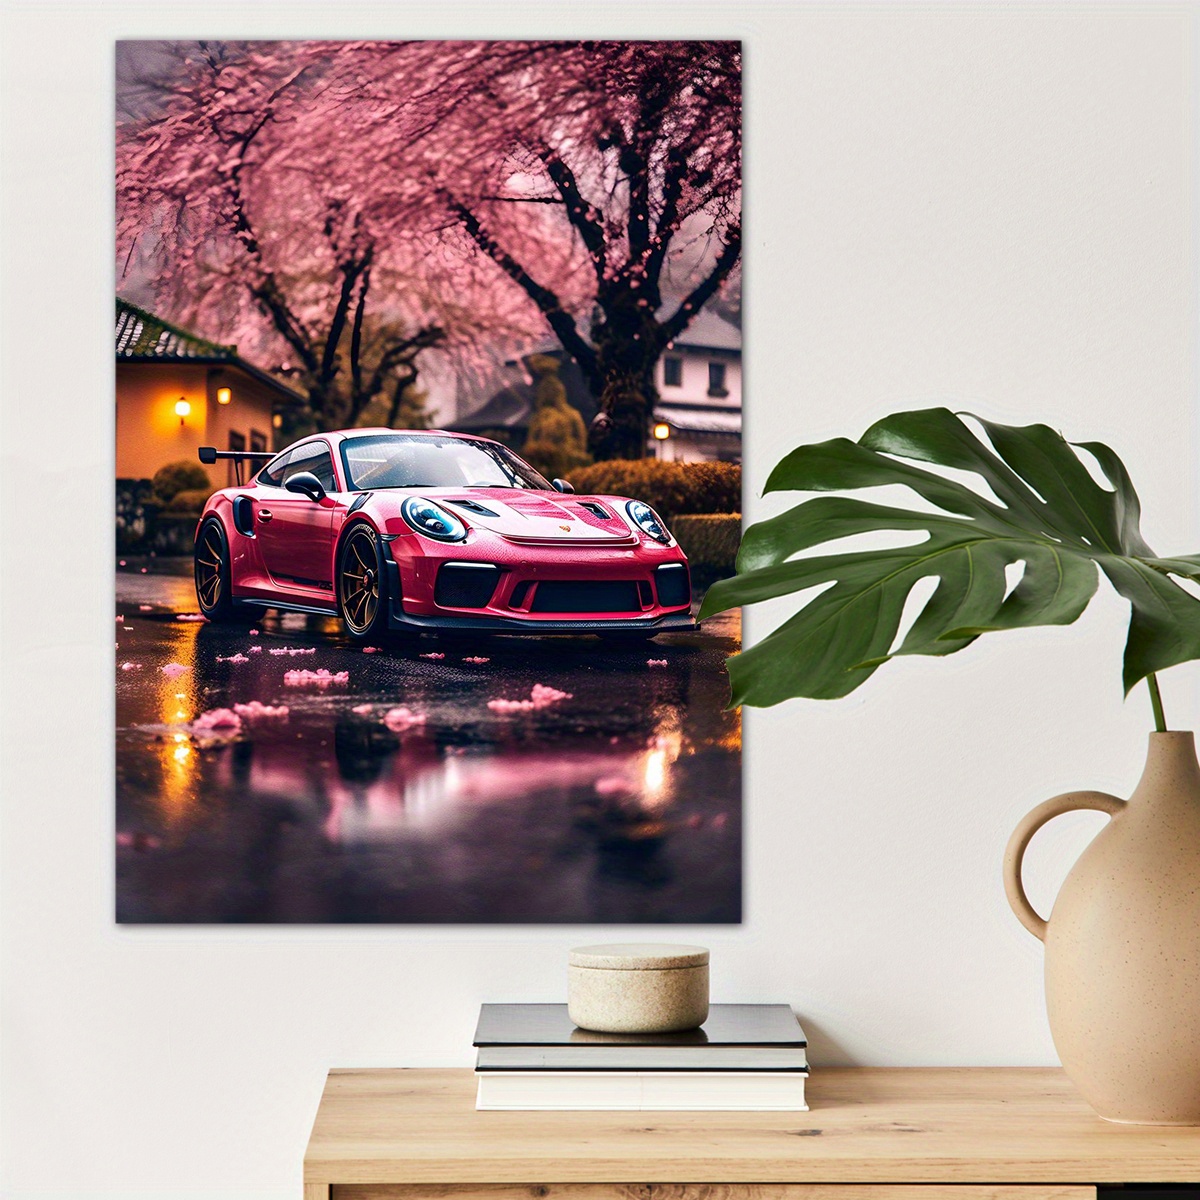 

1pc Cars And Cherry Blossom Canvas Wall Art For Home Decor, Modern Poster Wall Decor, Canvas Prints For Living Room Bedroom Kitchen Office Cafe Decor, Perfect Gift And Decoration